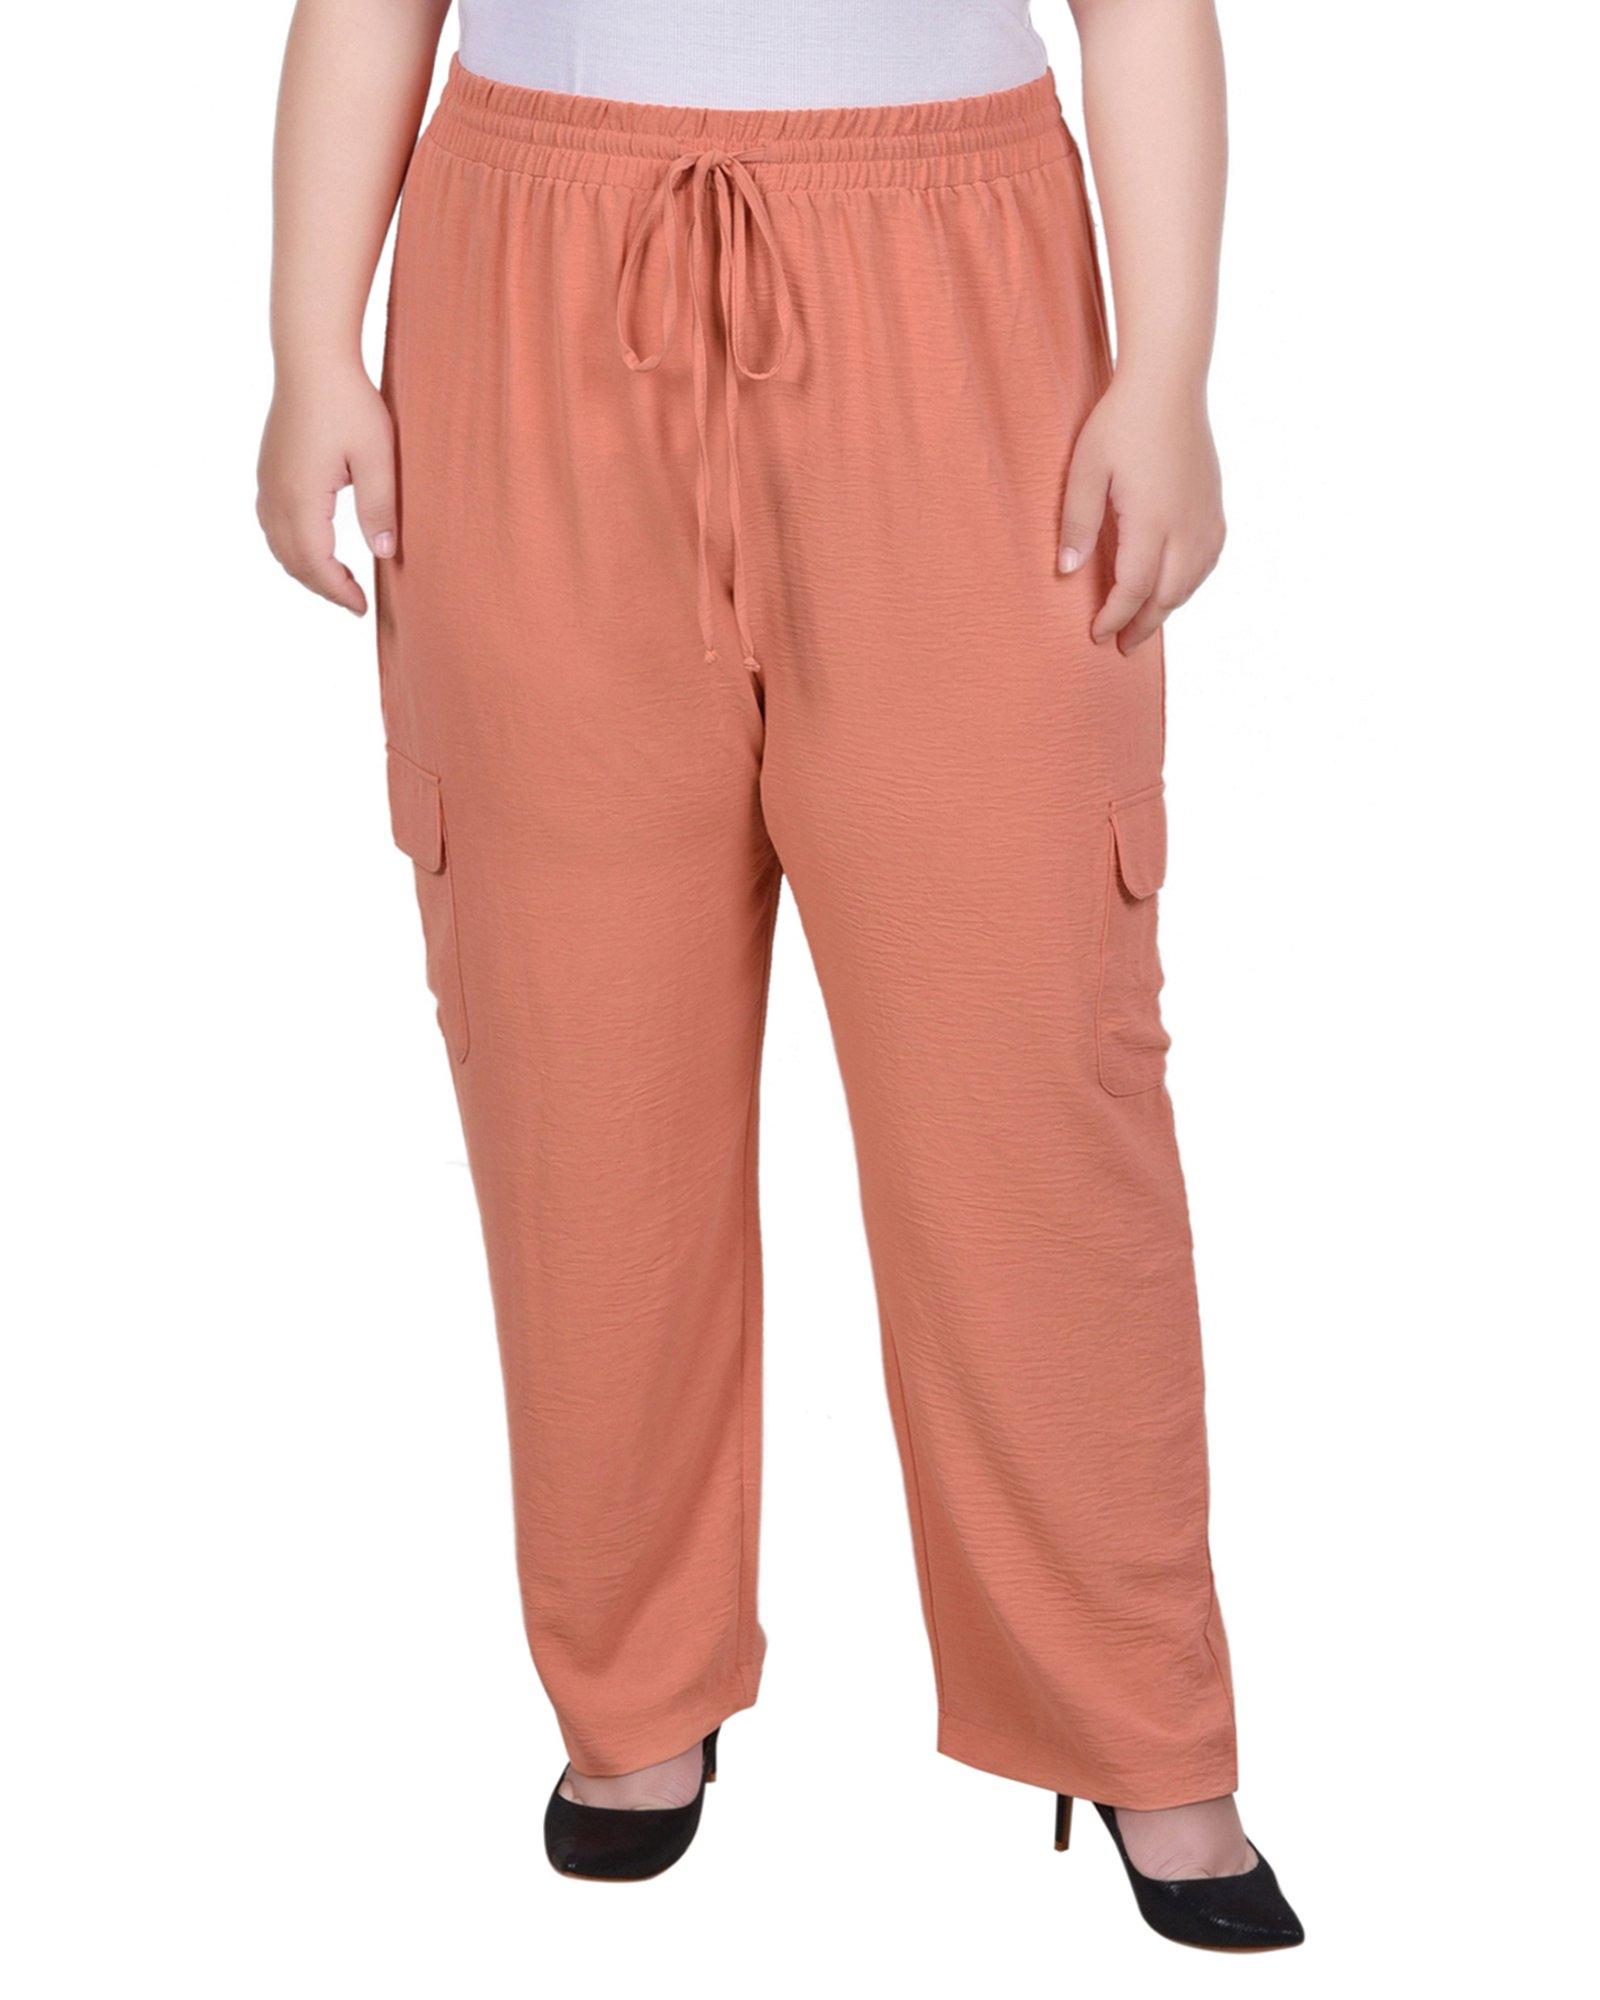 NY Collection Womens Plus Size Long Pull On Cargo Pants